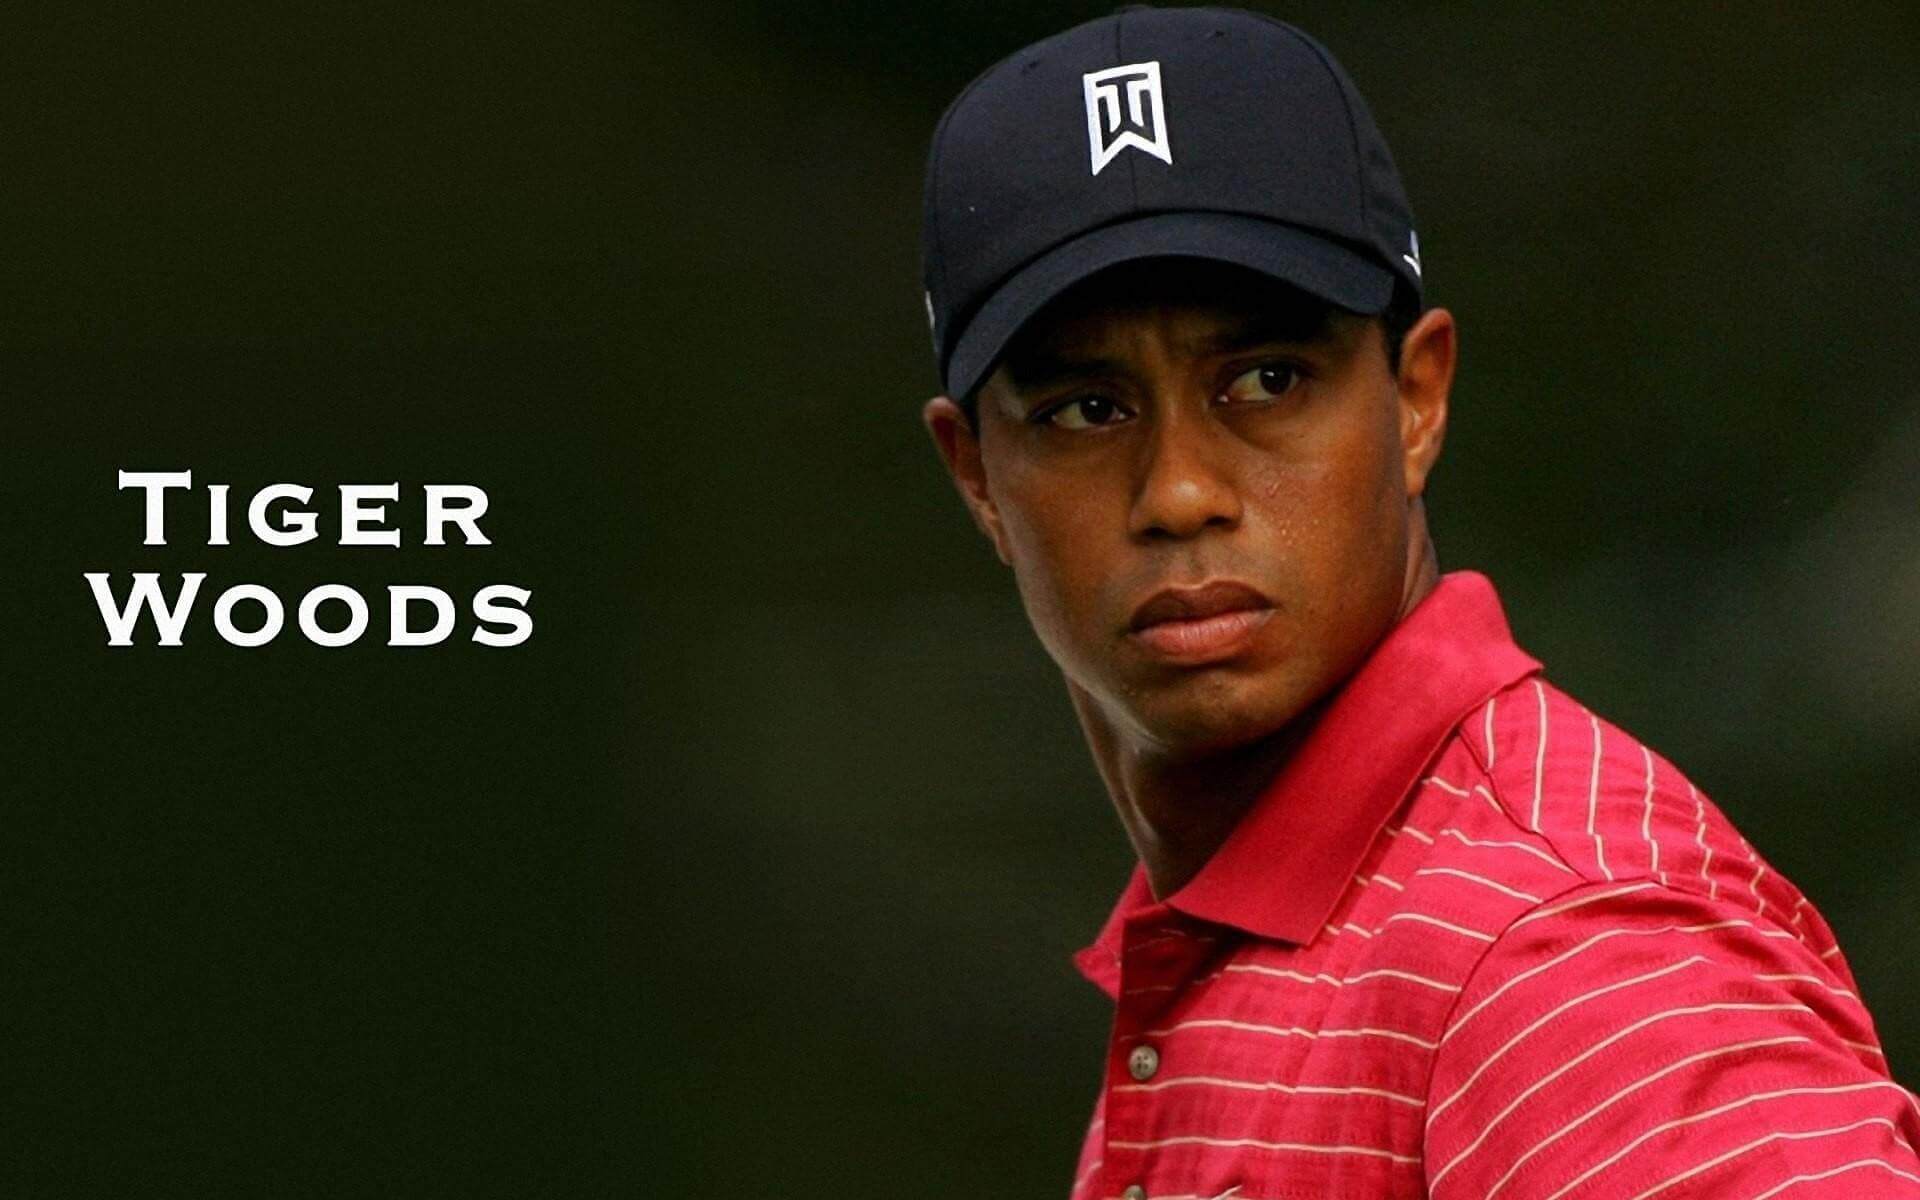 Image of Tiger Woods with Text